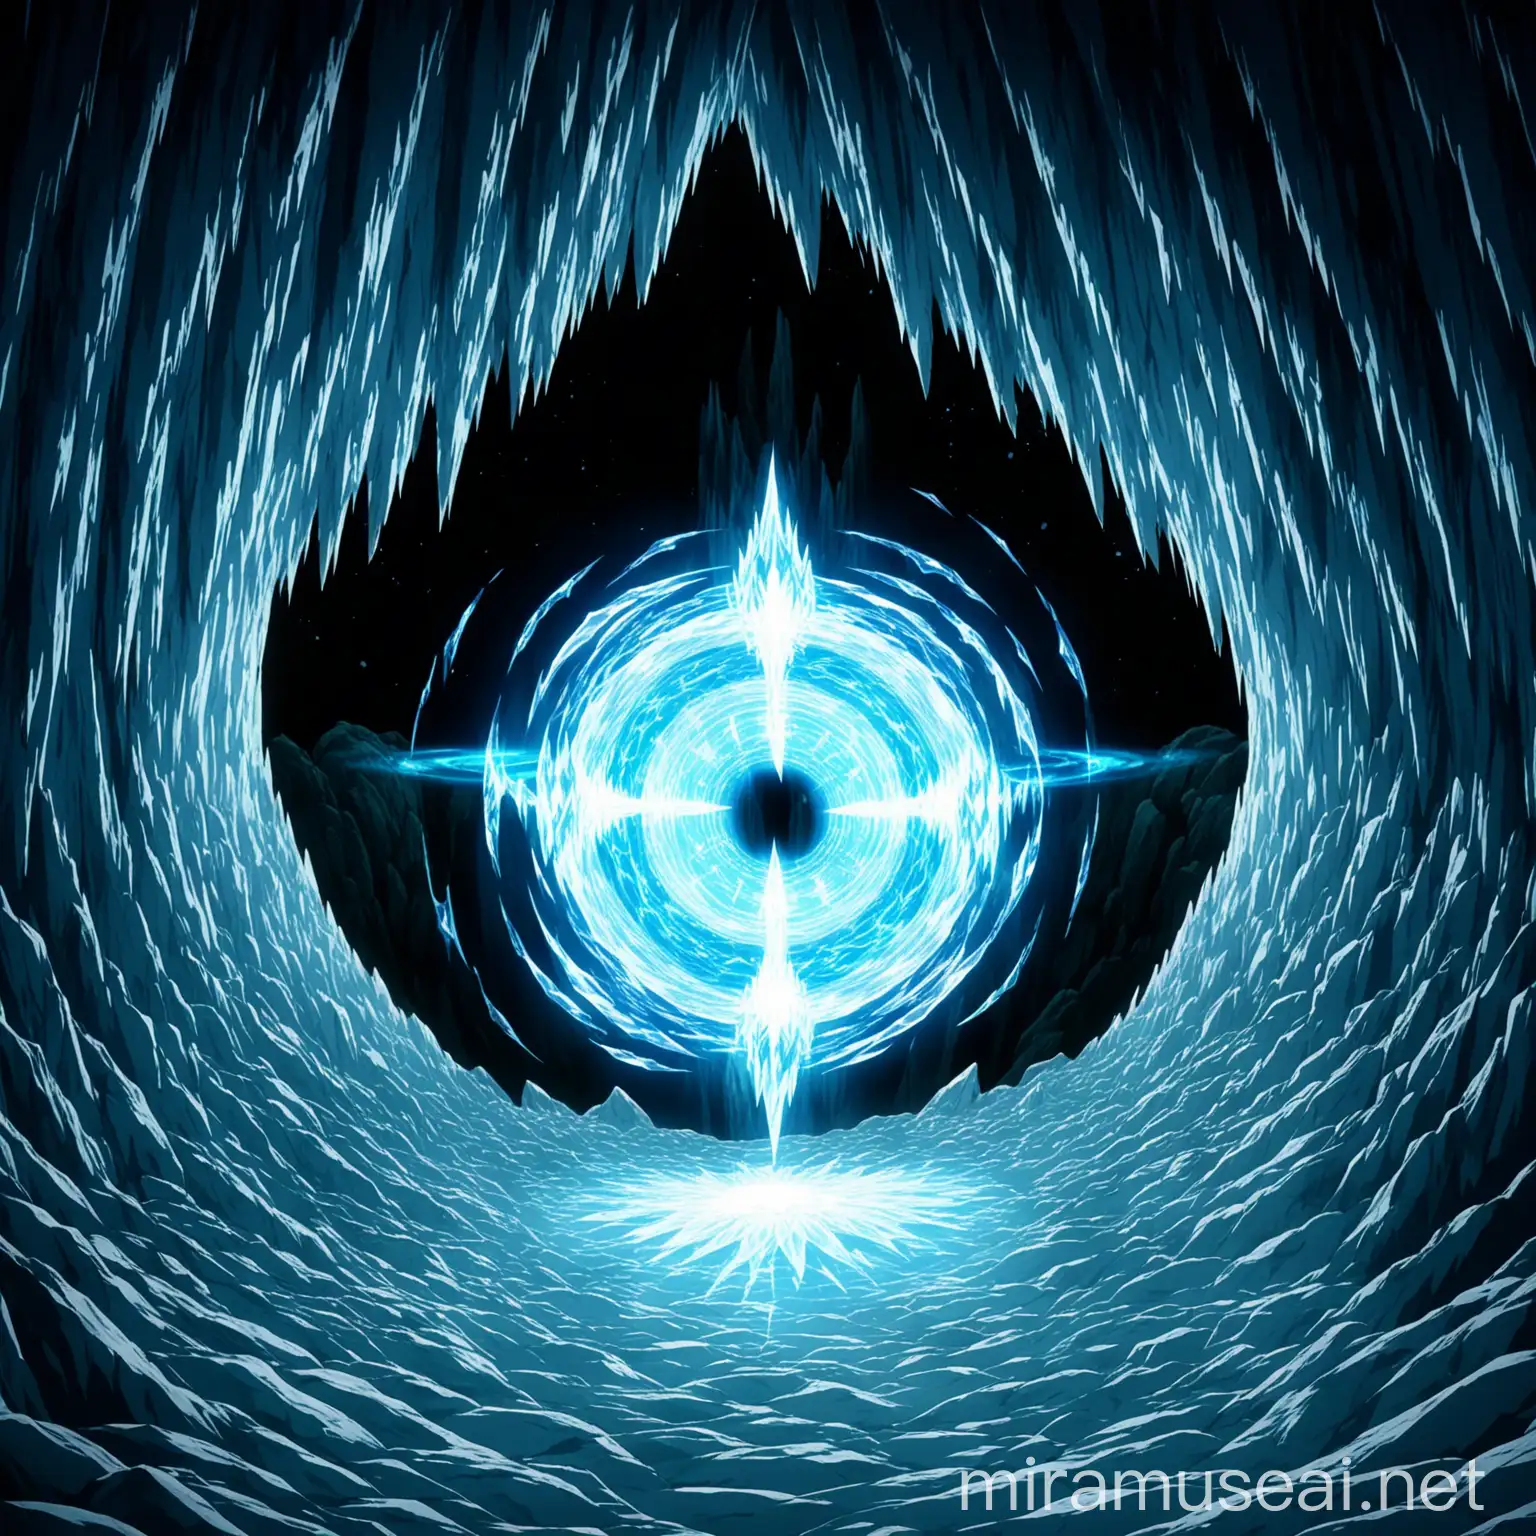 a dimensional portal in a cave, the dimensional portal is white and blue with a will-o'-the-wisp appearance and is vortex-shaped, there is ice in the cave. in anime